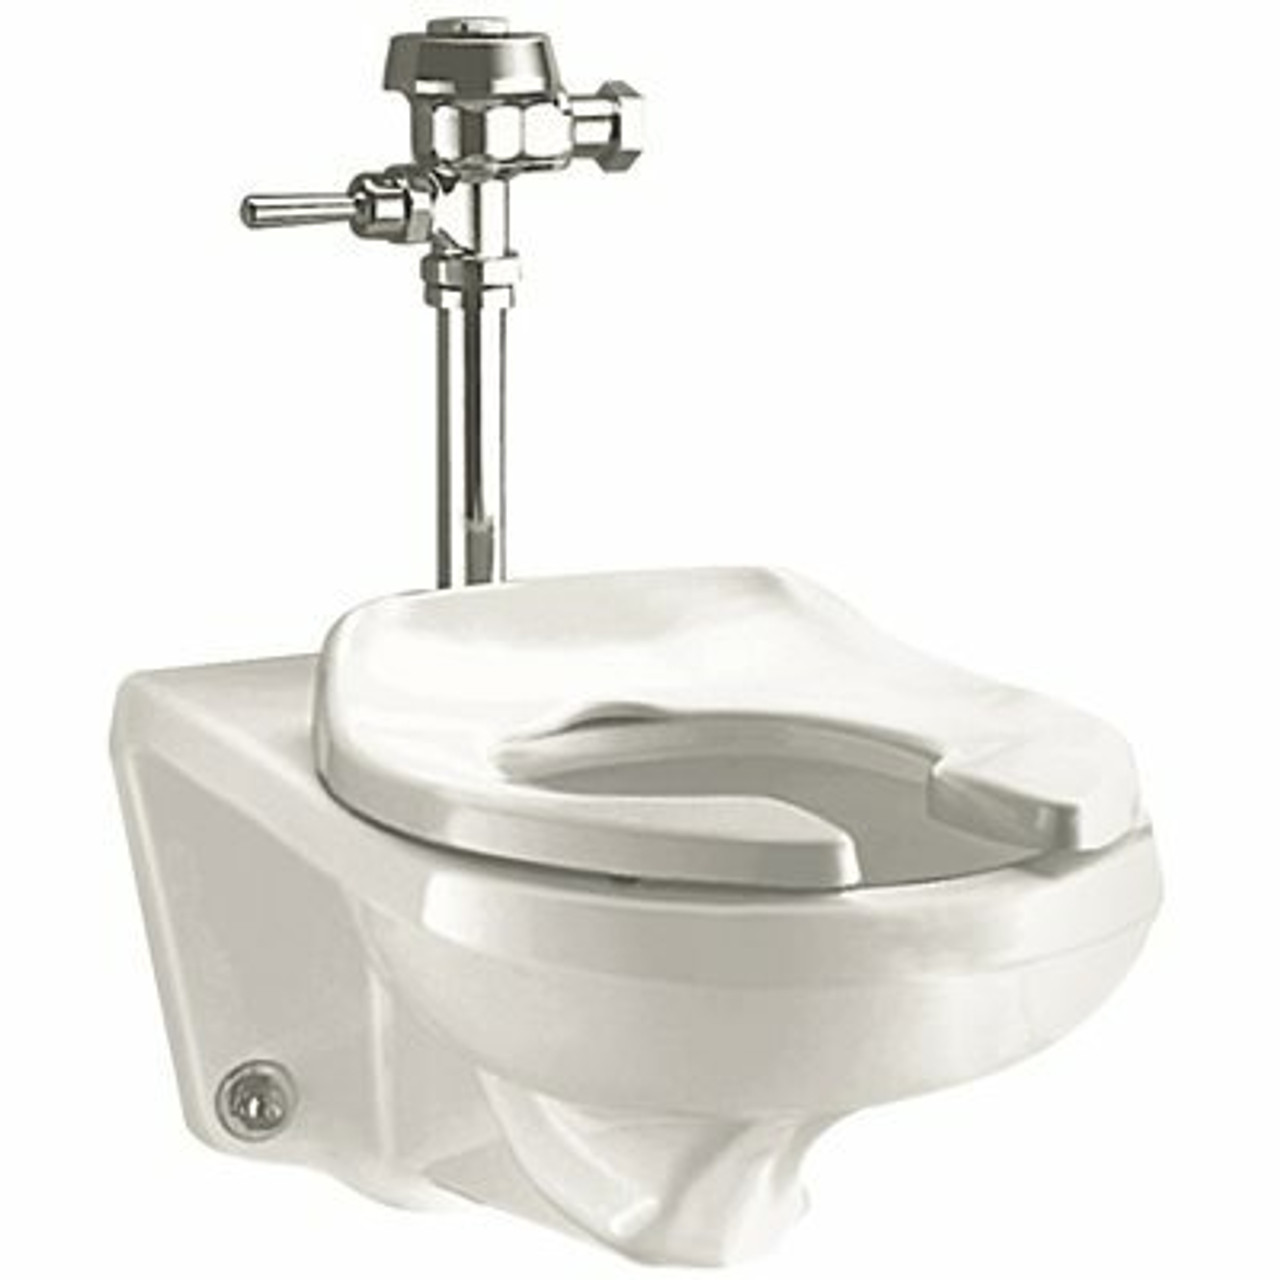 American Standard Afwall Top Spud 1.6 Gpf Single Flush Elongated Flush Valve Toilet Bowl Only In White